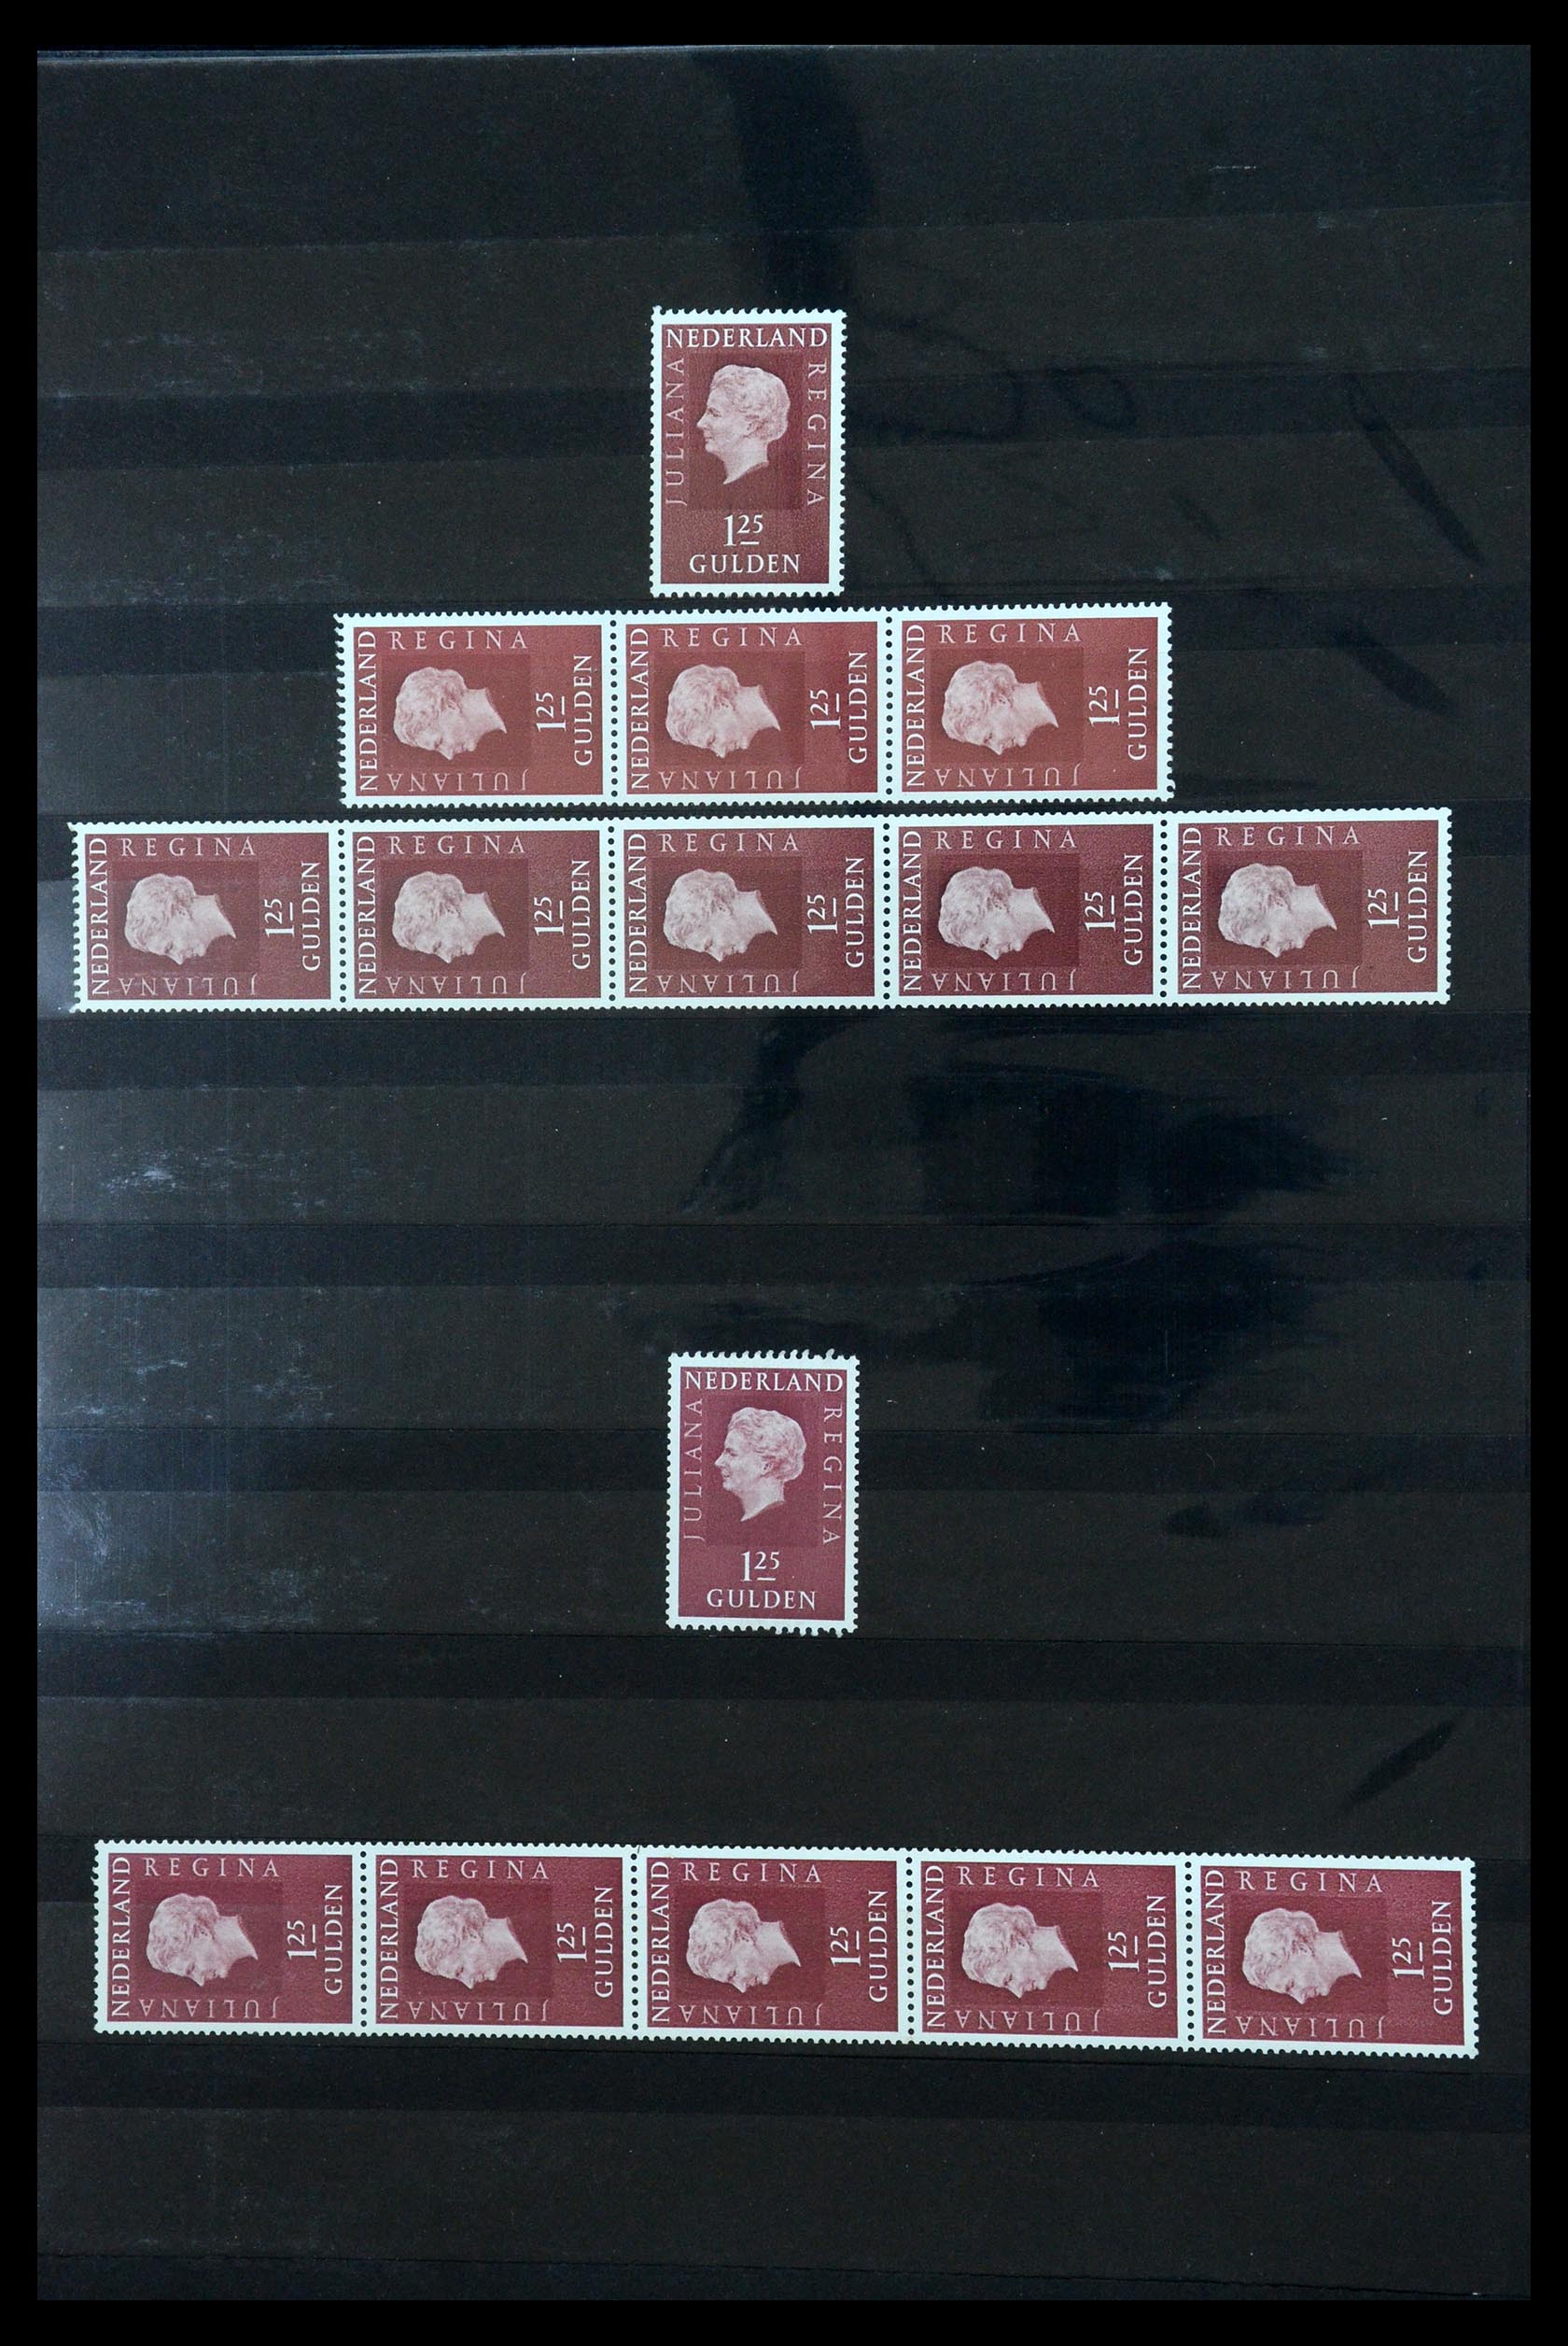 35543 061 - Stamp Collection 35543 Netherlands coilstamps 1965-1972.